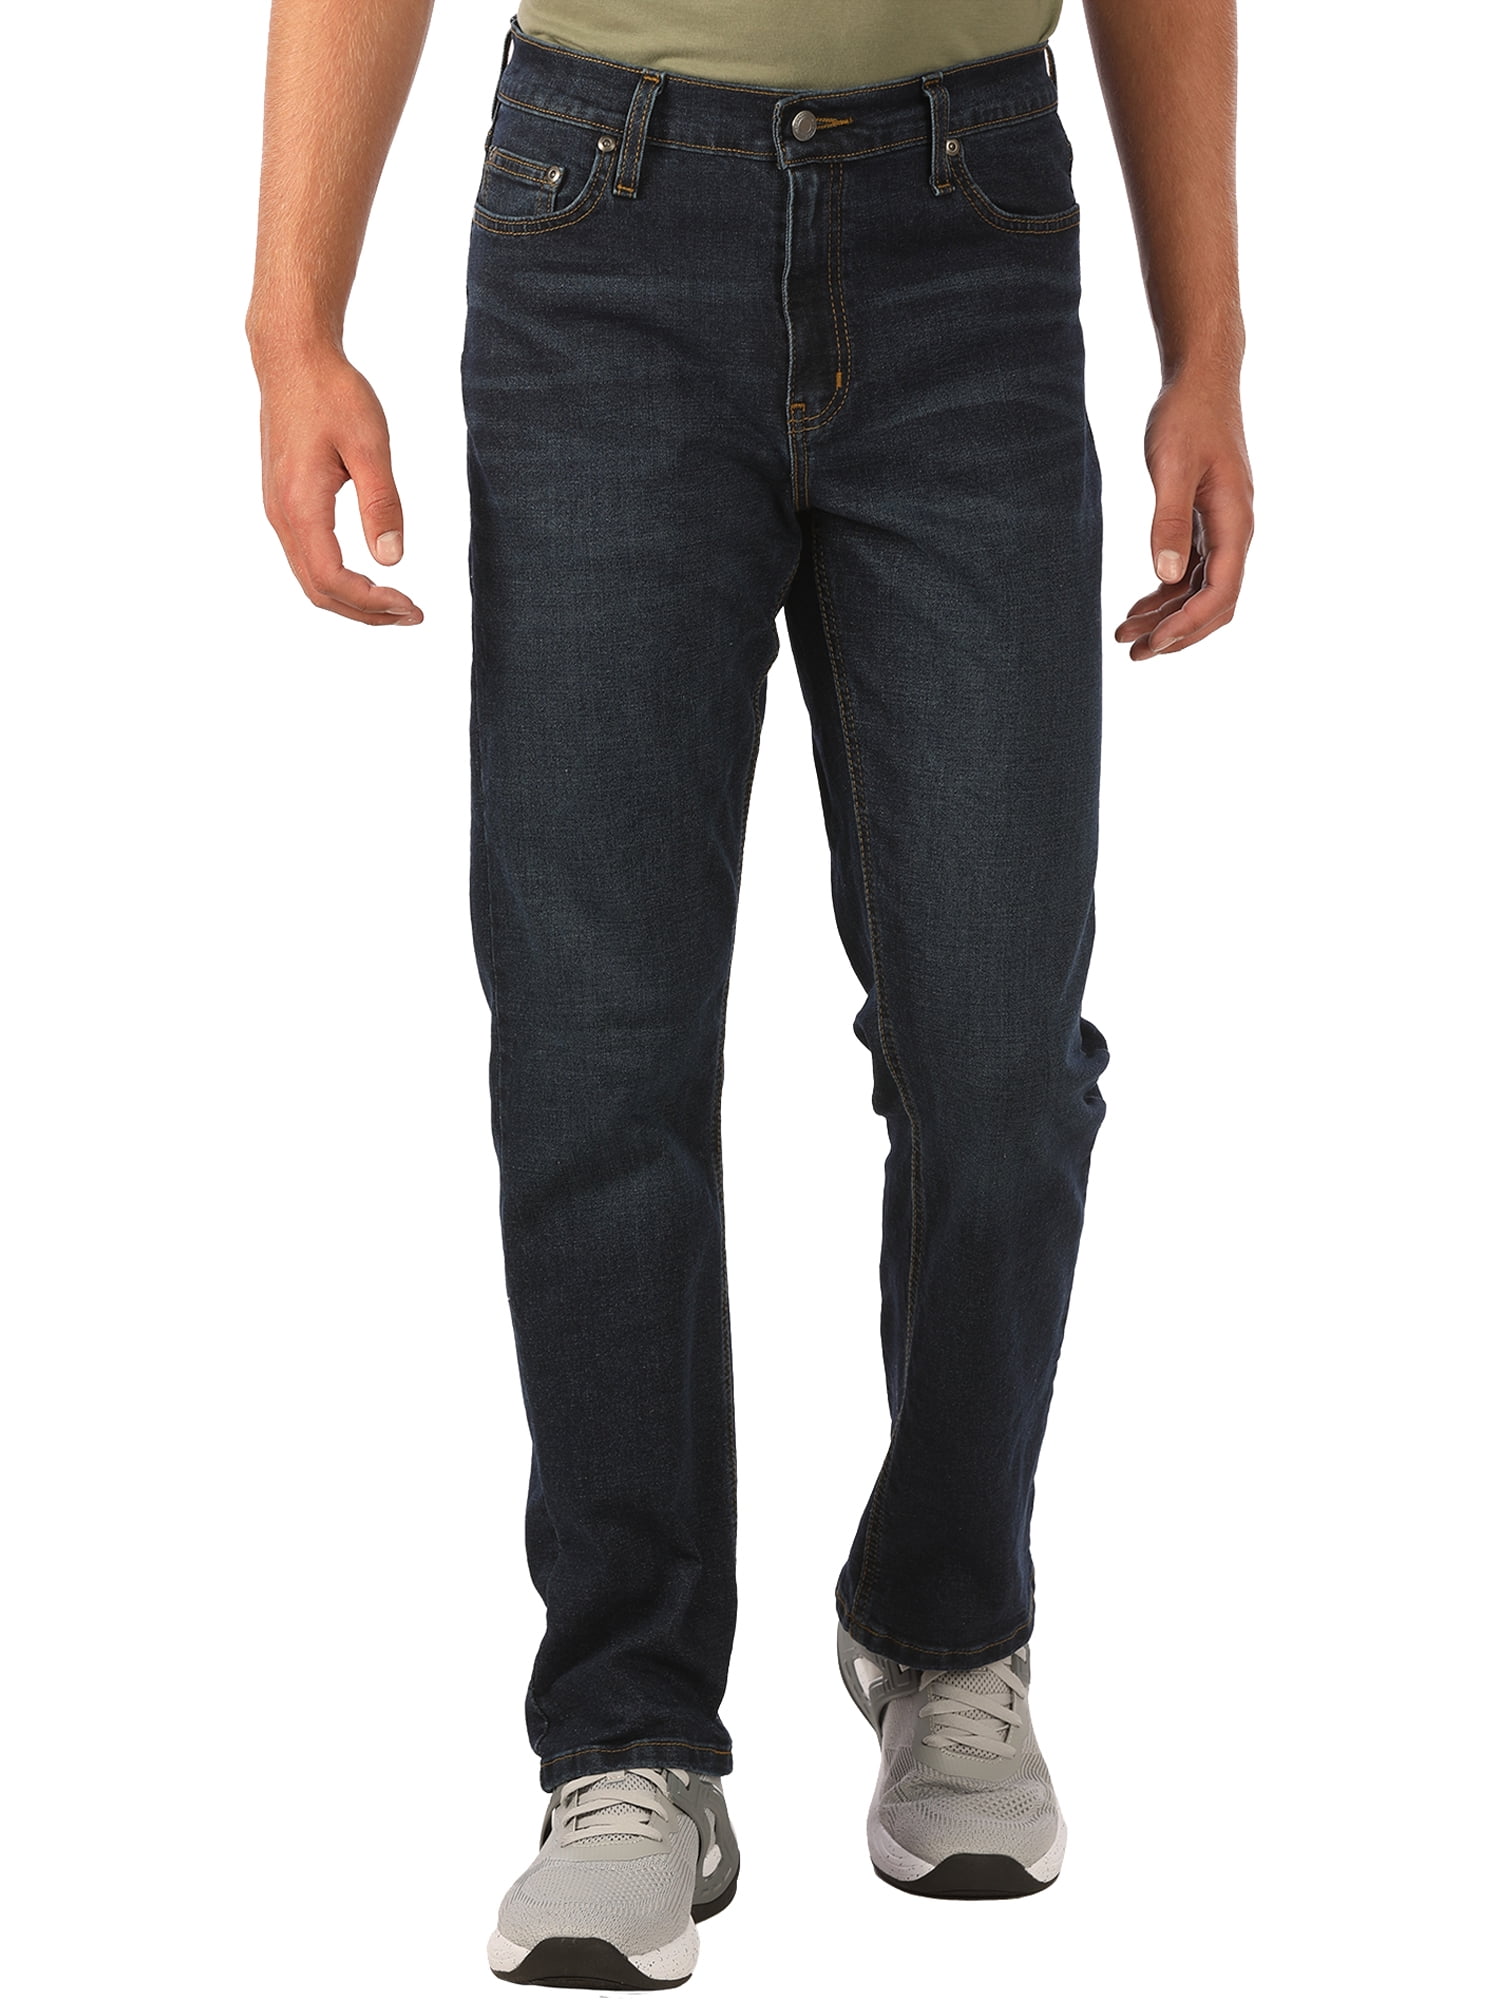 George Men's and Big Men's Relaxed Fit Jeans - Walmart.com